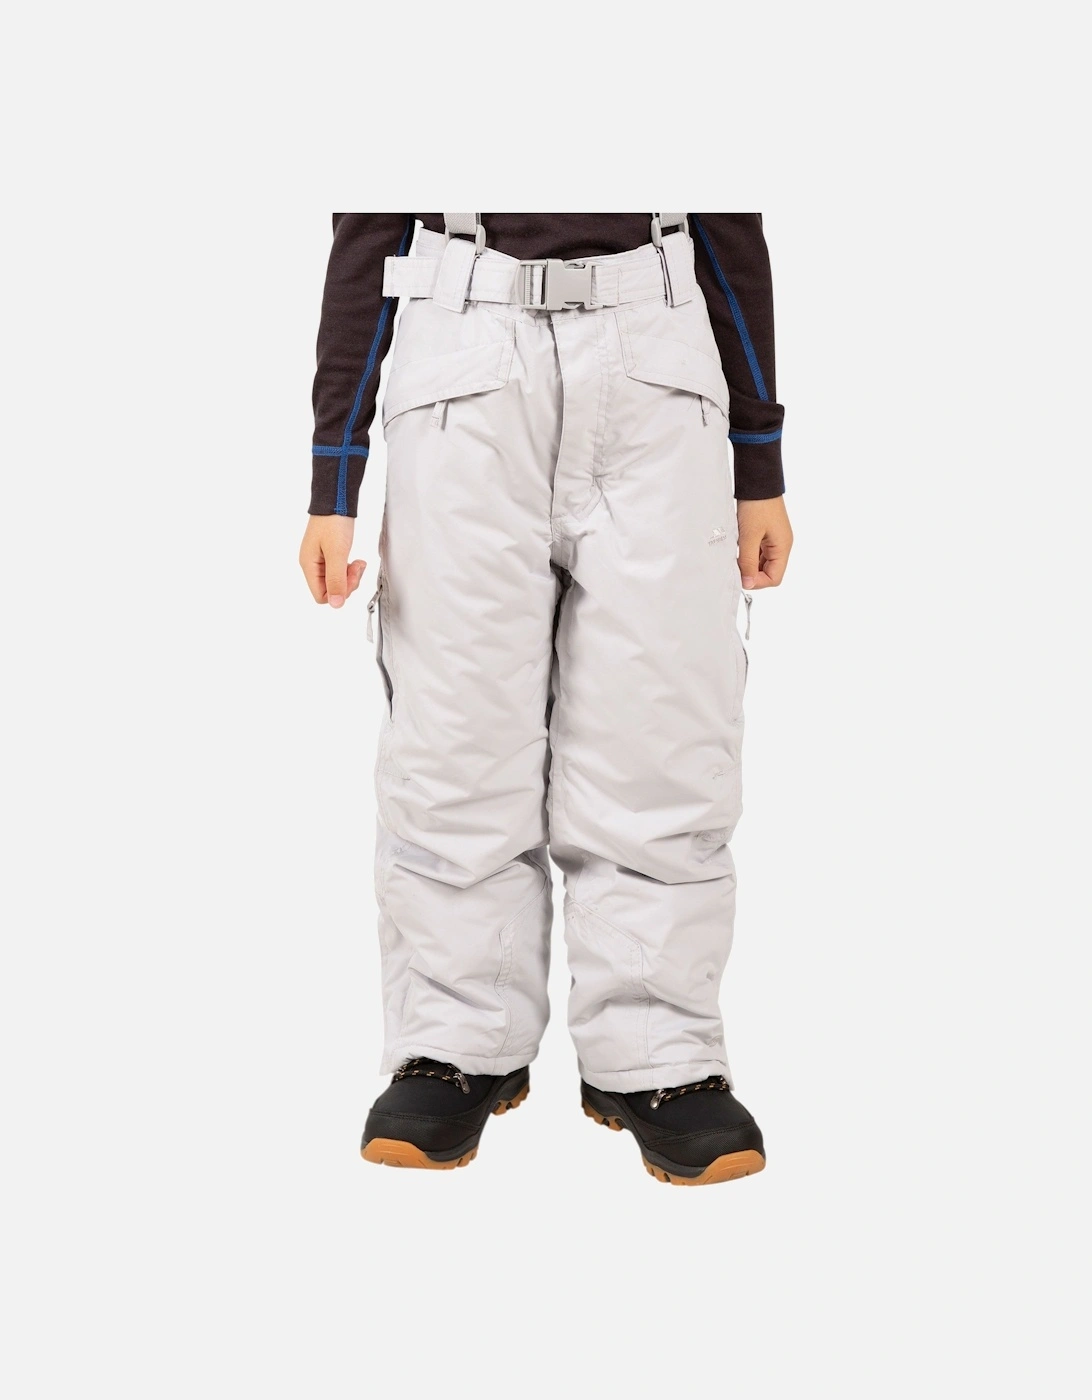 Childrens/Kids Marvelous Insulated Ski Trousers